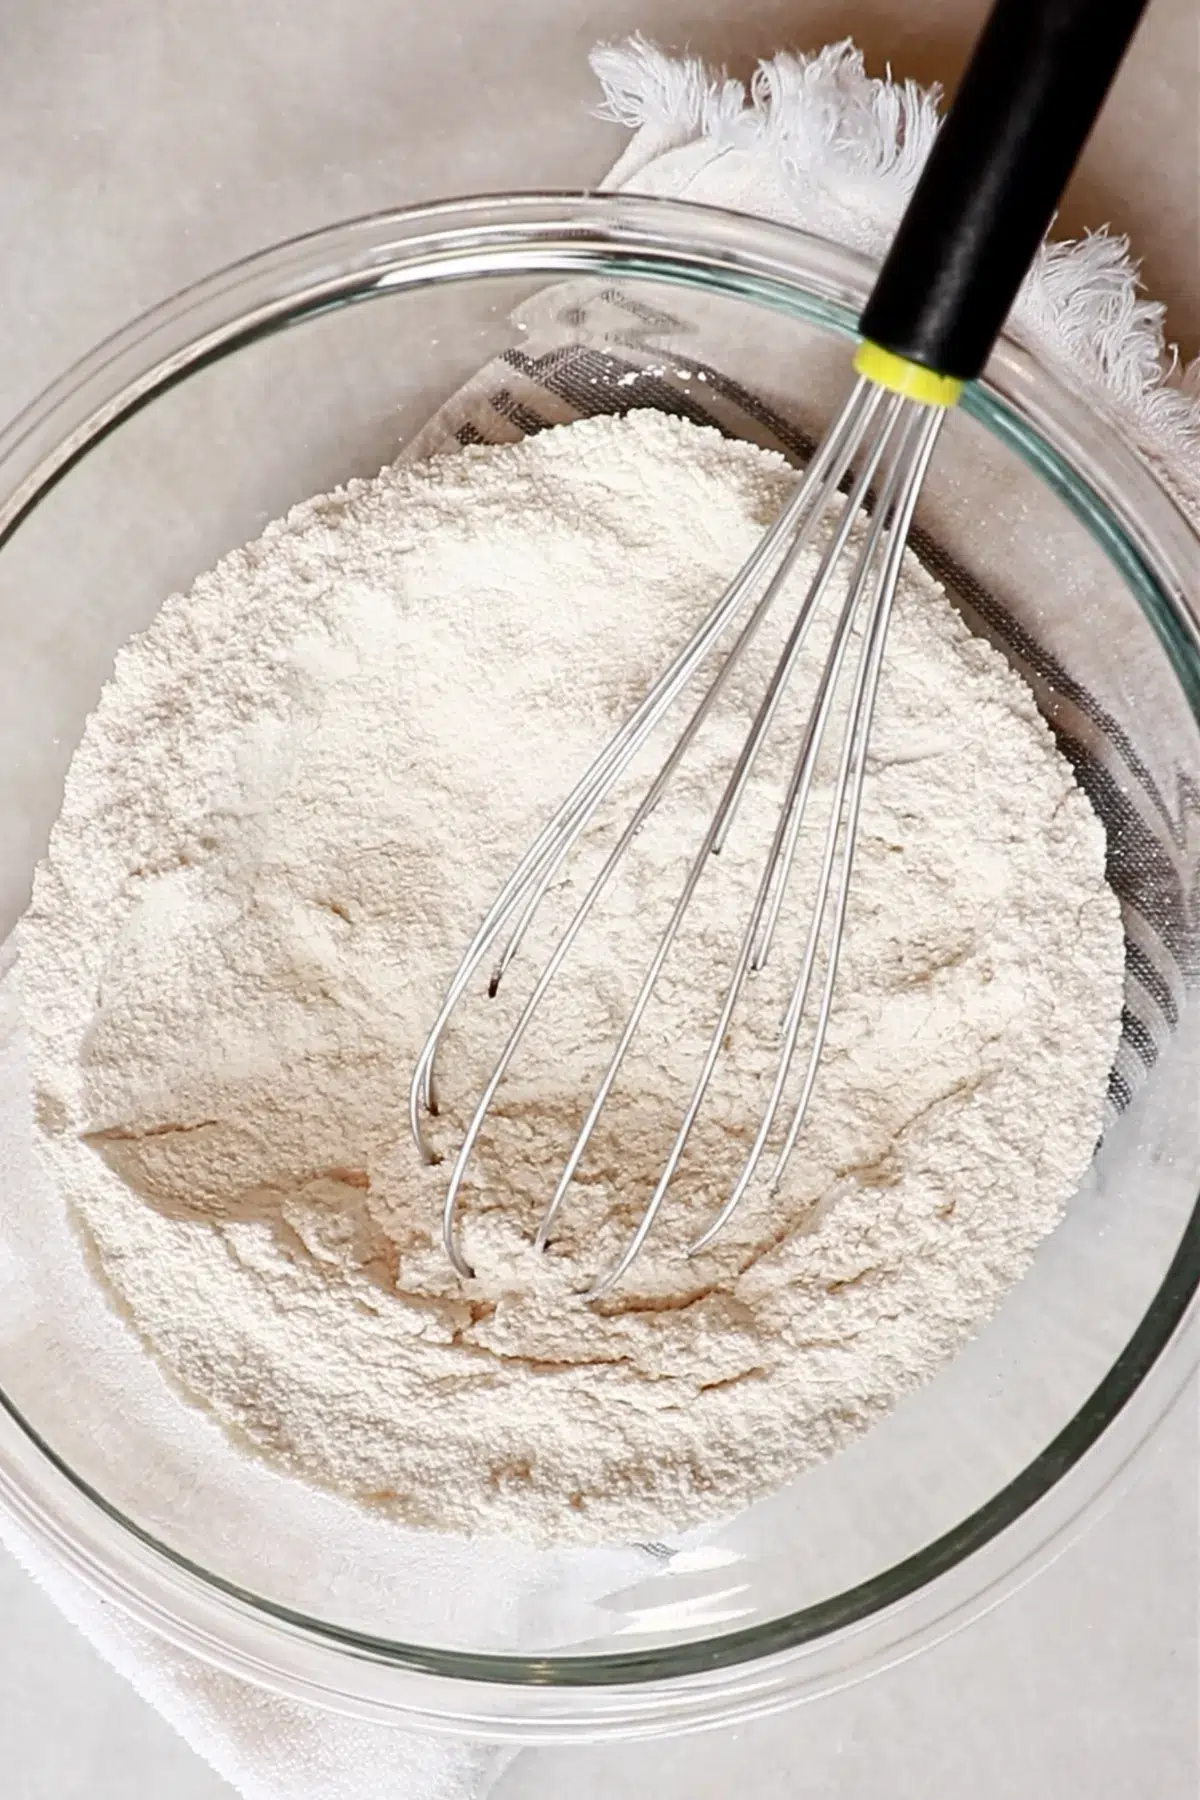 the dry ingredients in a bowl